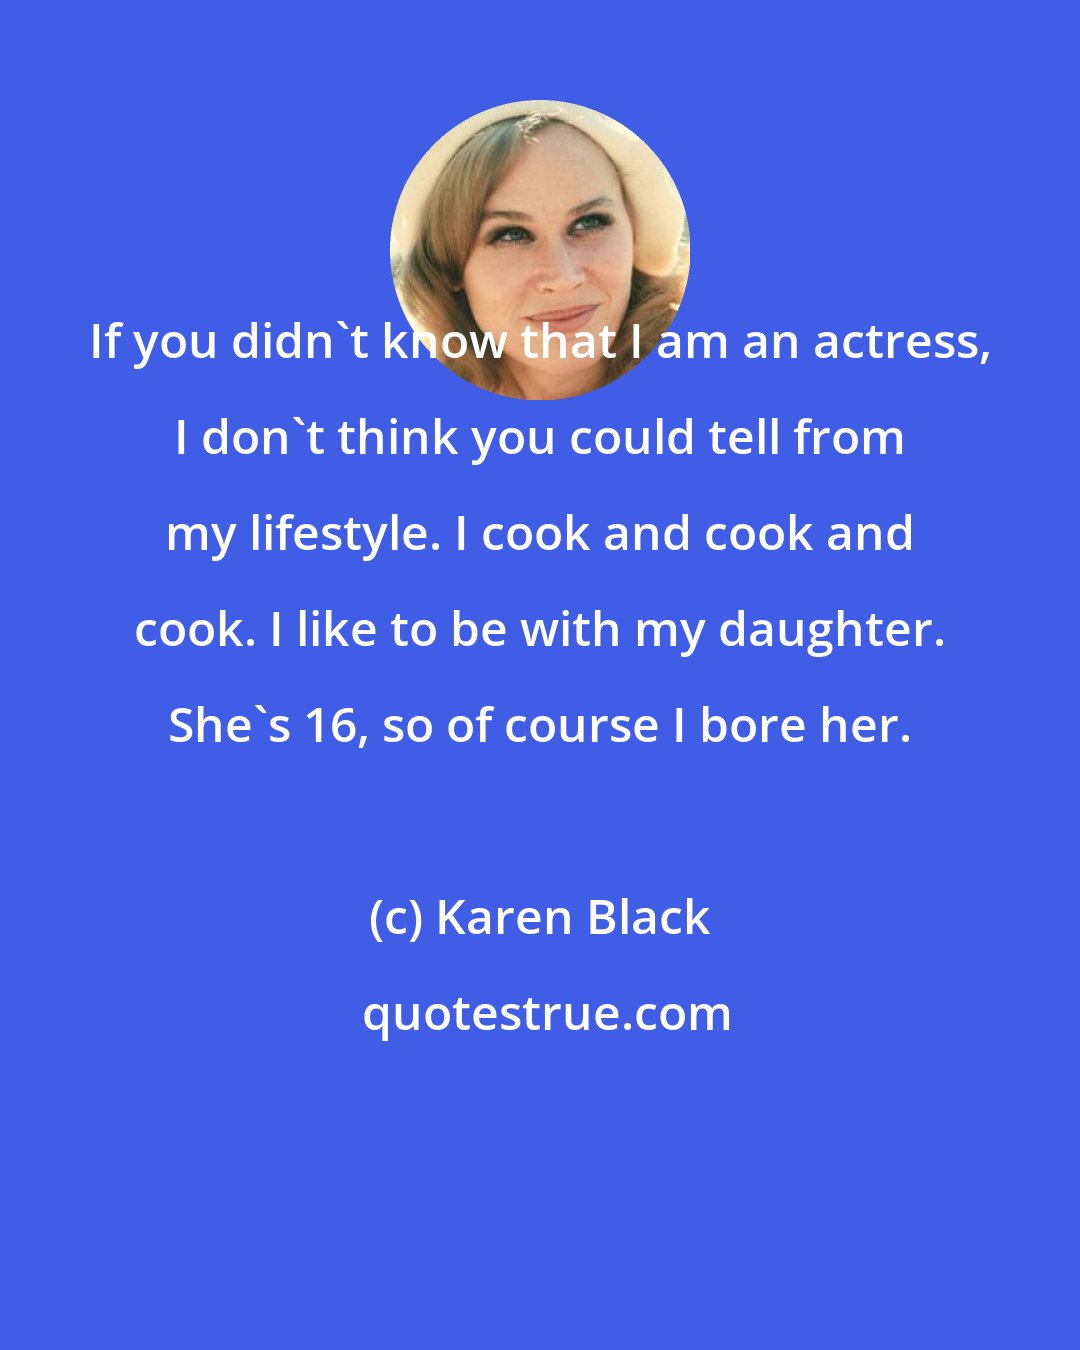 Karen Black: If you didn't know that I am an actress, I don't think you could tell from my lifestyle. I cook and cook and cook. I like to be with my daughter. She's 16, so of course I bore her.